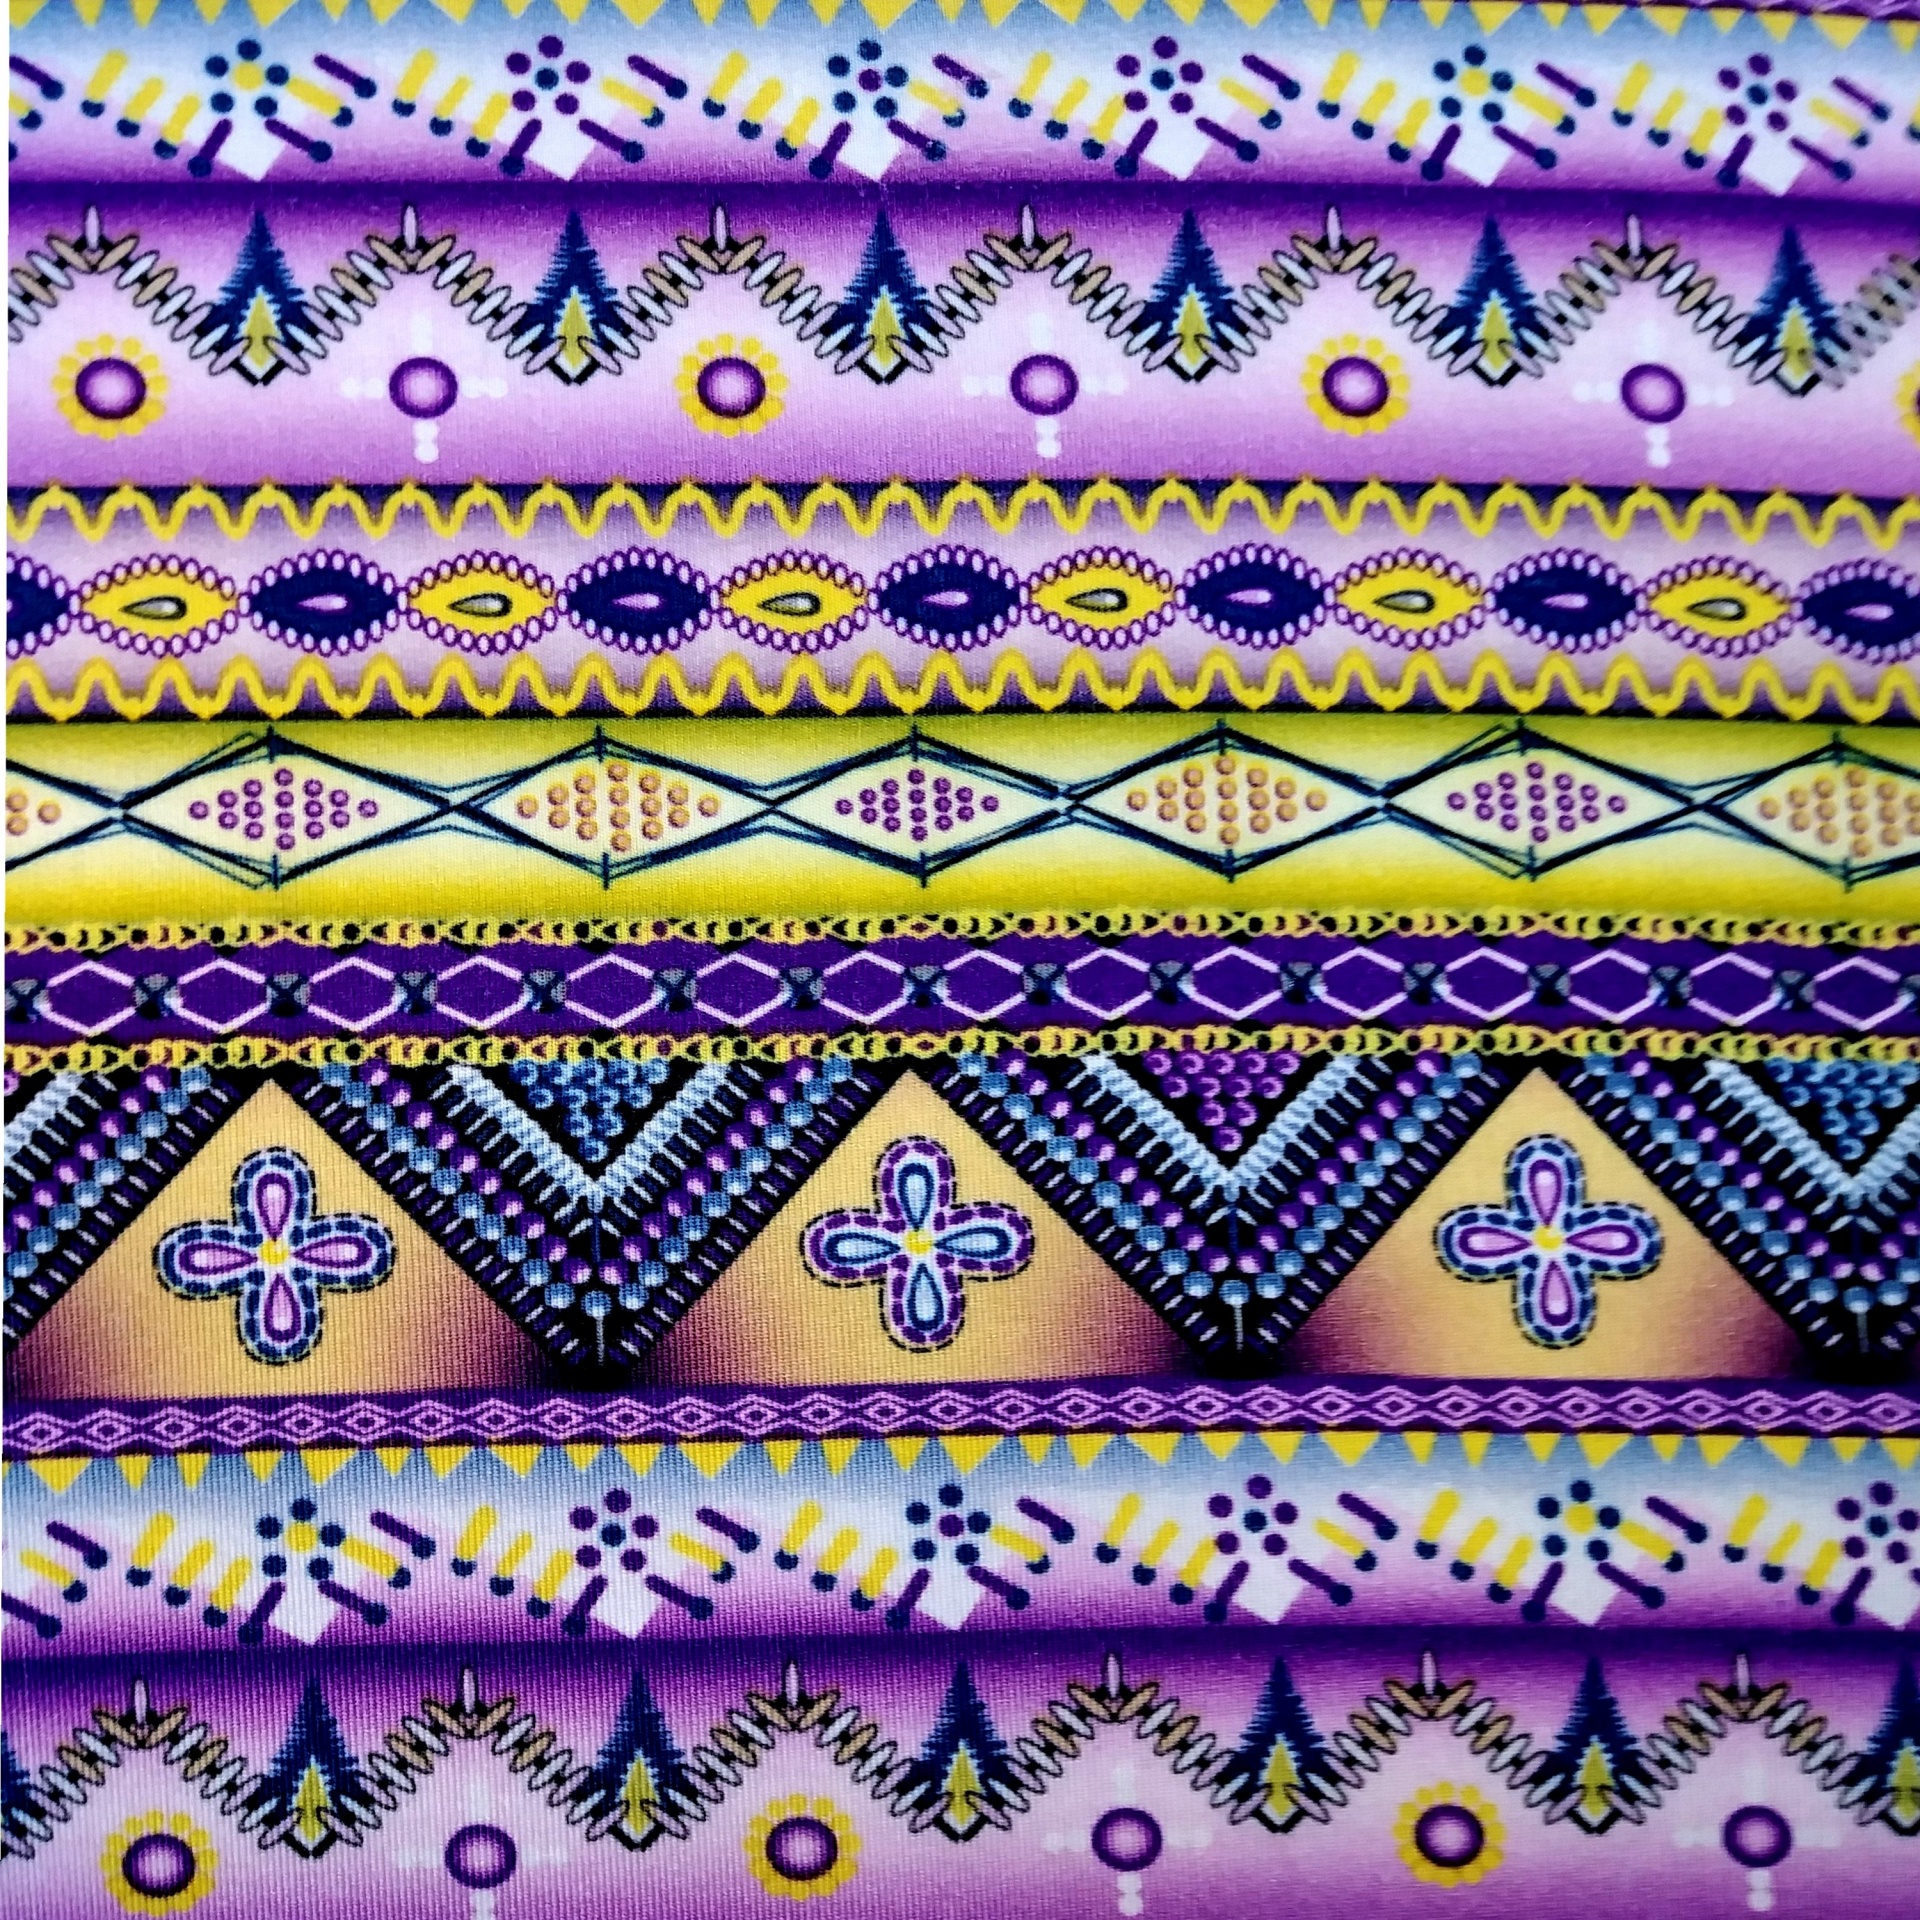 Background Patterned Fabric - 2